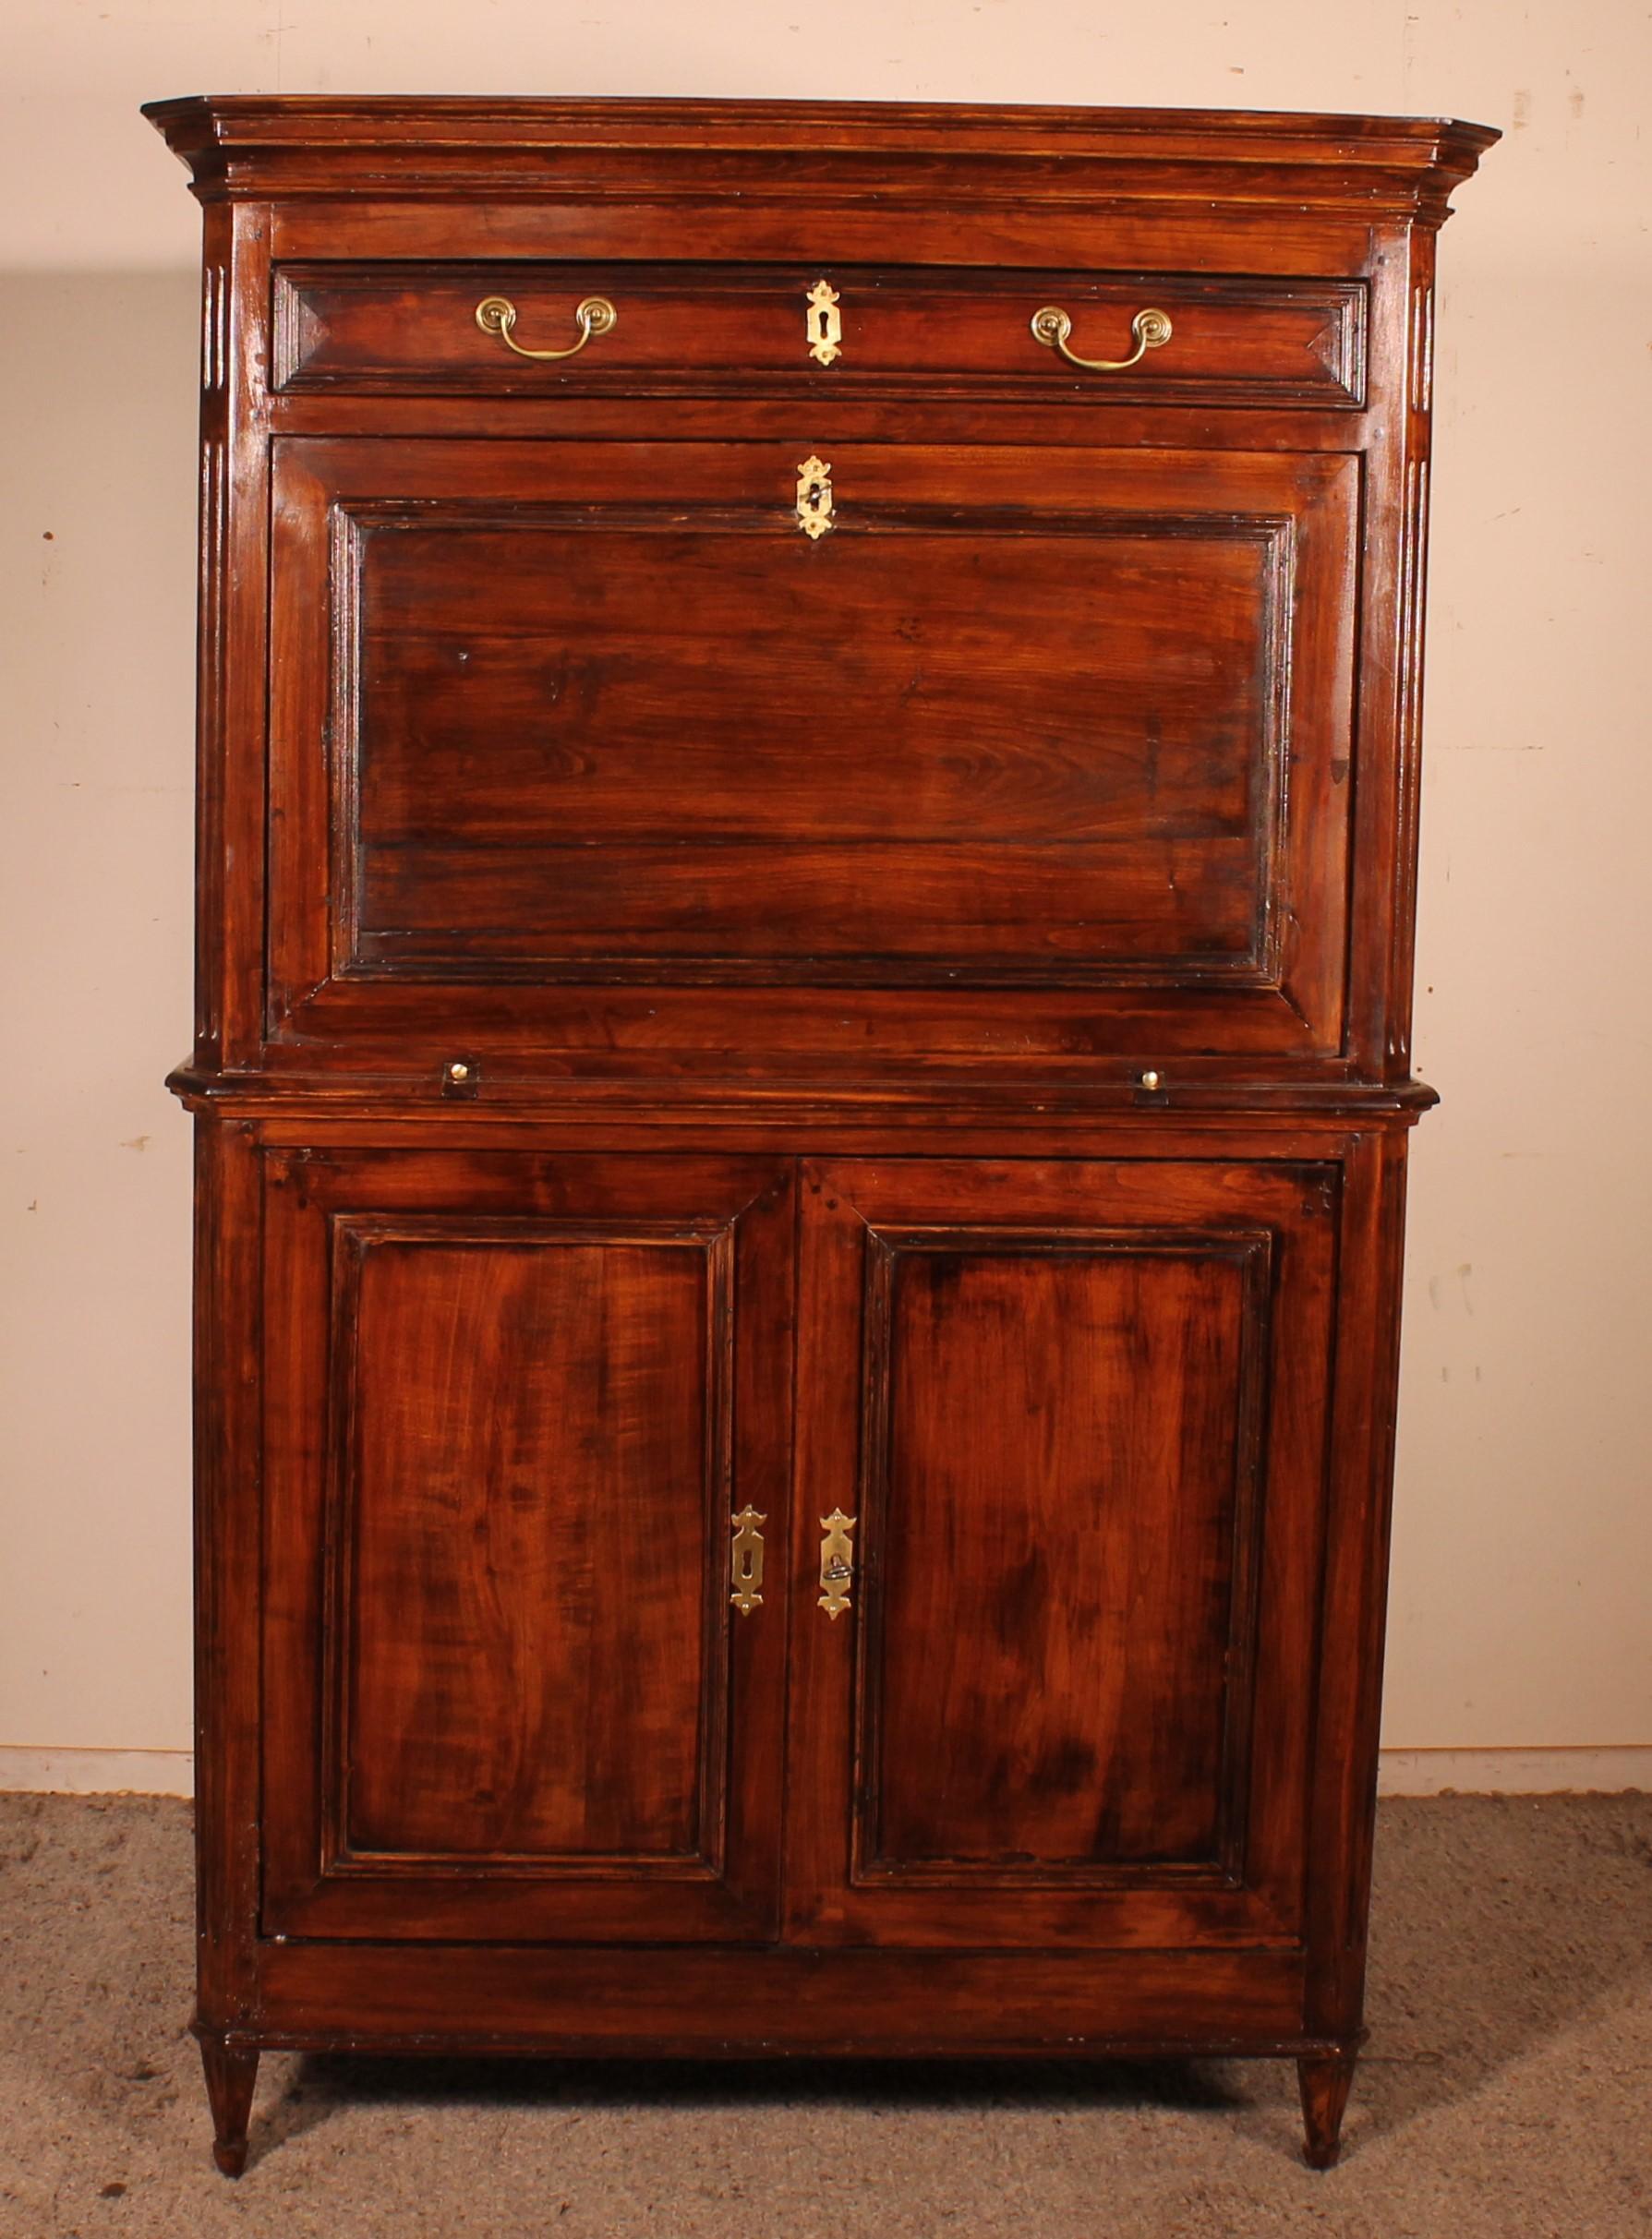 Surprising and rare Louis XVI secretary in cherrywood from the 18th century
Uncommon secretary given its large size of 1m74 and its very beautiful interior
Very beautiful patina and in superb condition
Note: some old traces of wood beasts on the